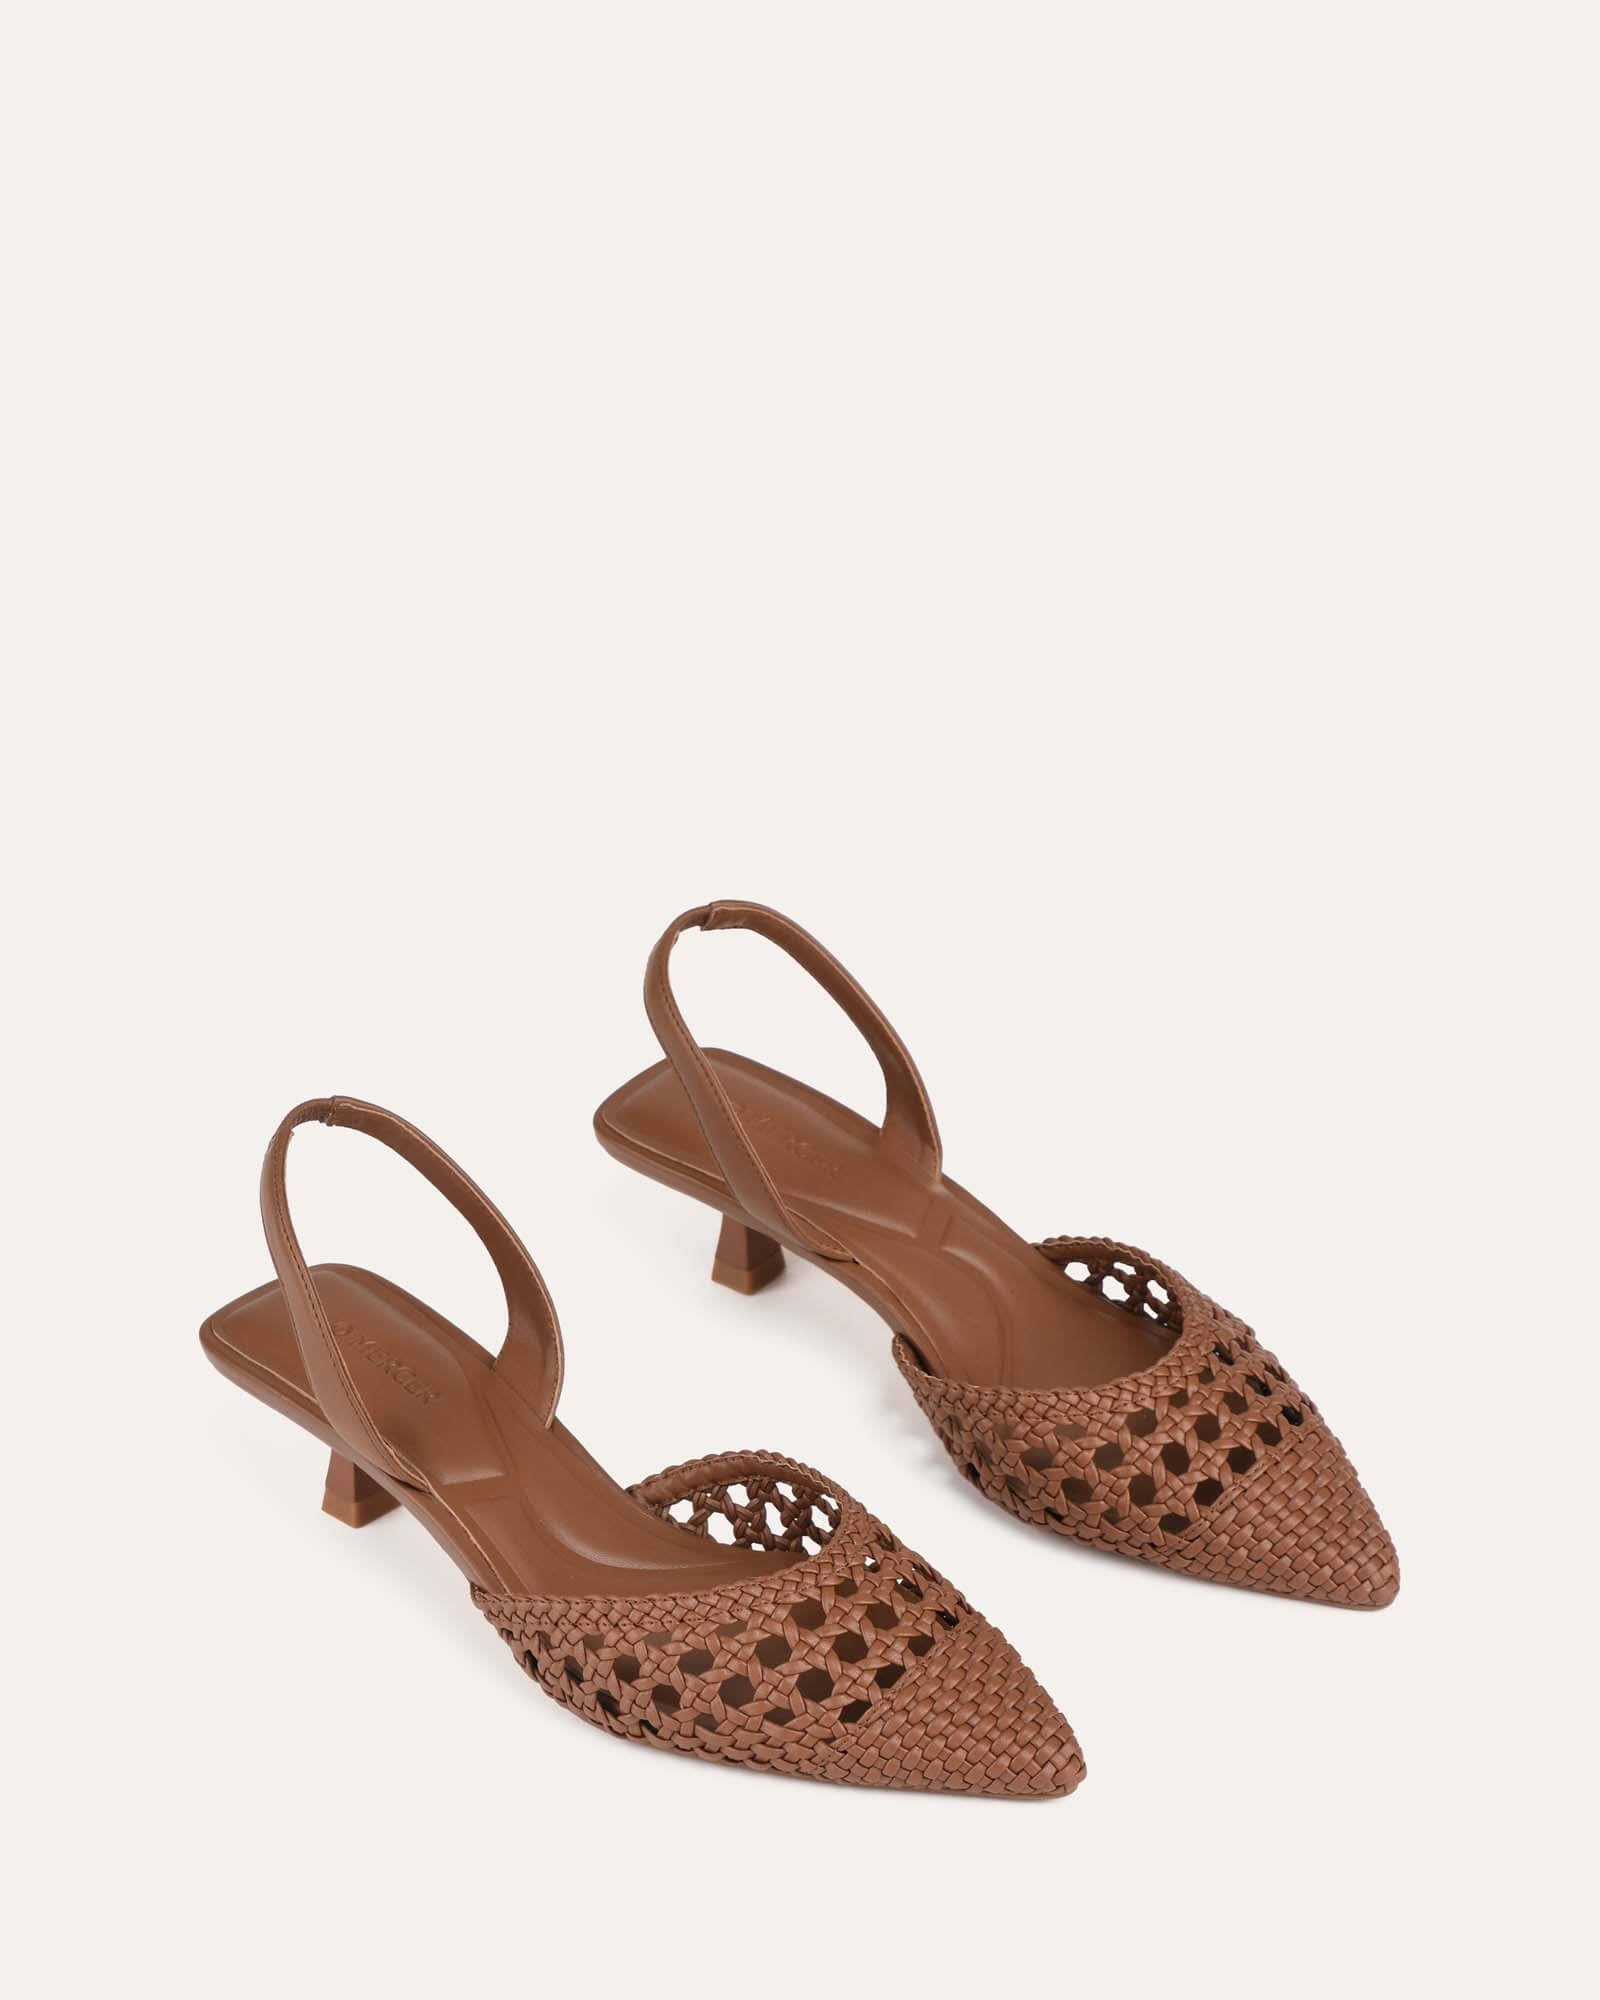 KATE SPADE Brown Suede Loafers Low Heels Shoes | Brown suede loafers, Low  heel shoes, Kate spade shoes flats